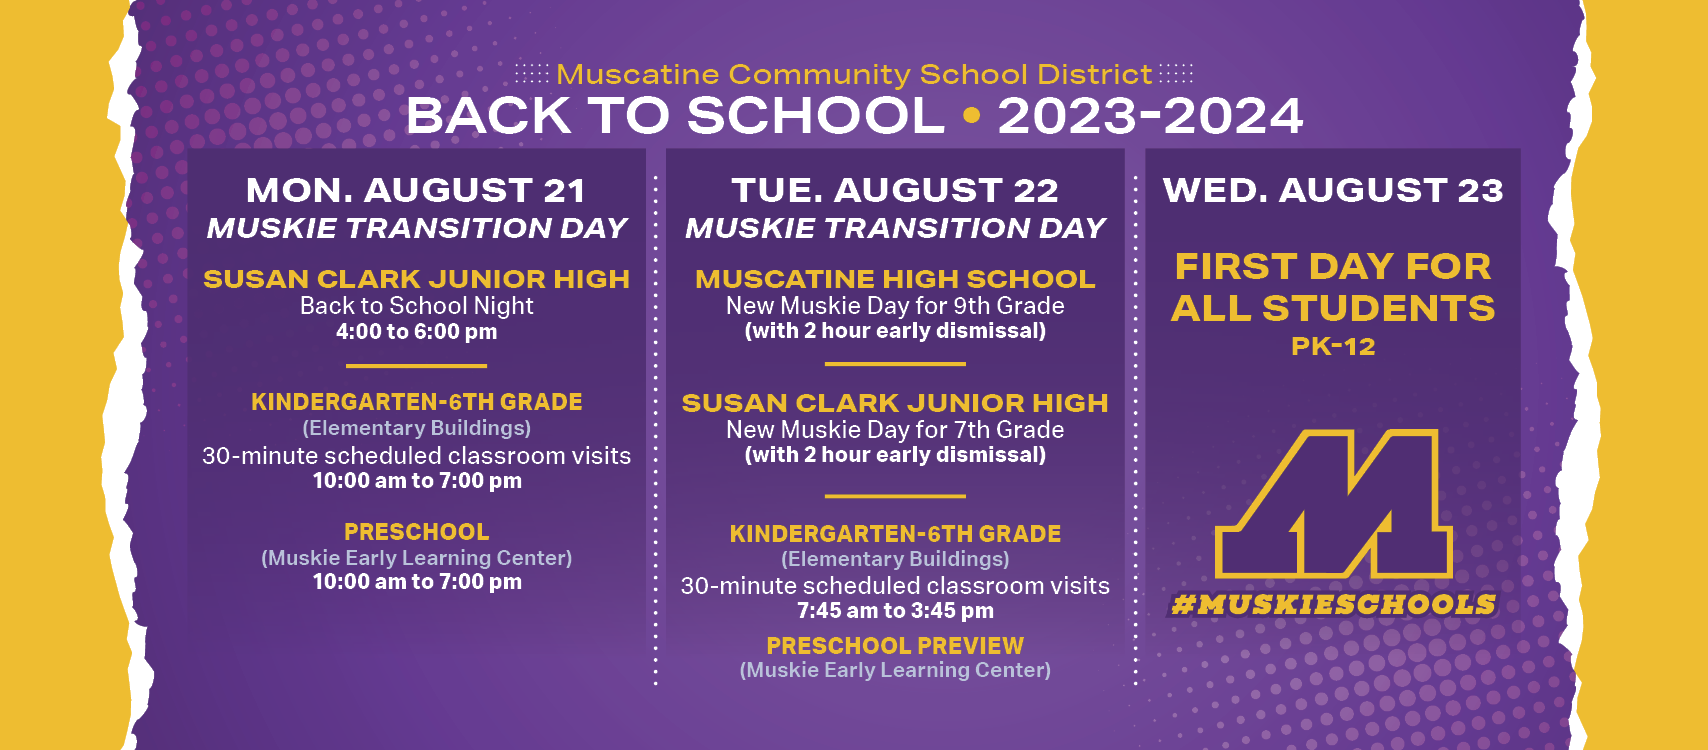 Welcome to the 2023-2024 School Year!